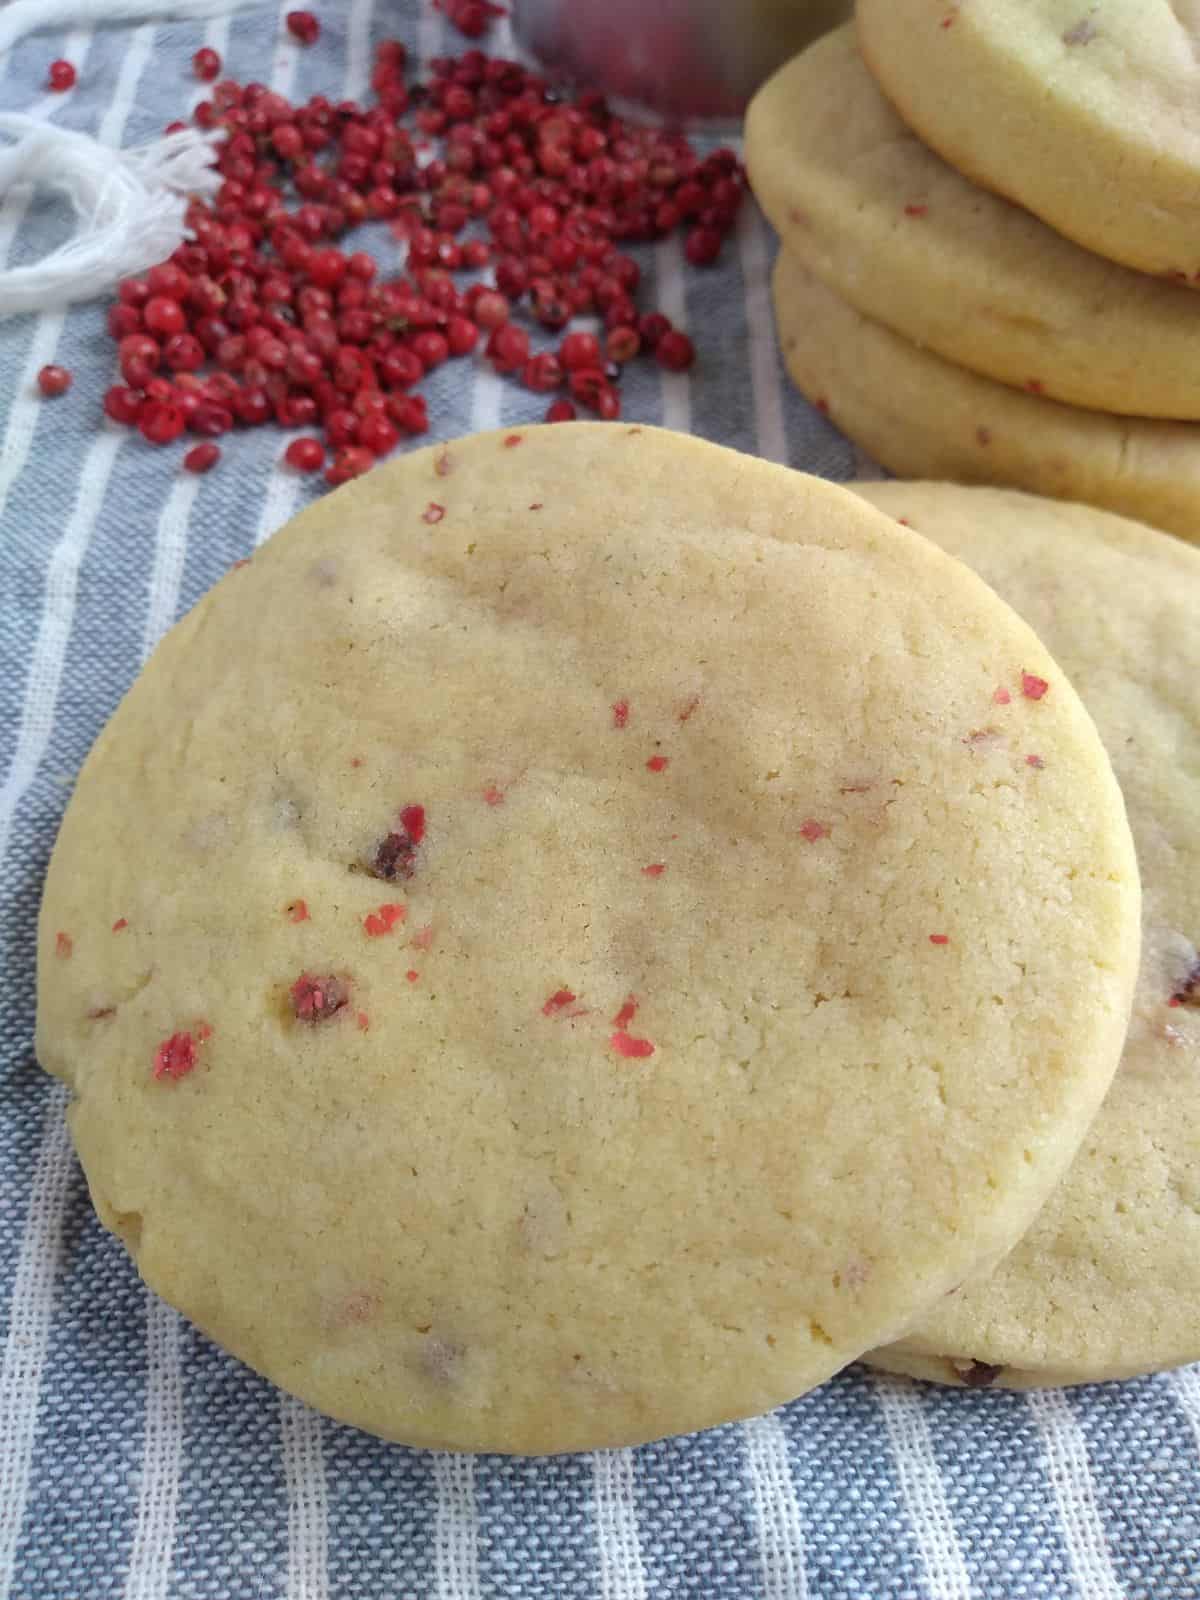 A sugar cookie filled with pink peppercorns on top of other cookies with a stack of the same cookies in the background. The cookies are on top of a gray striped towel with pink peppercorns in the top left corner.